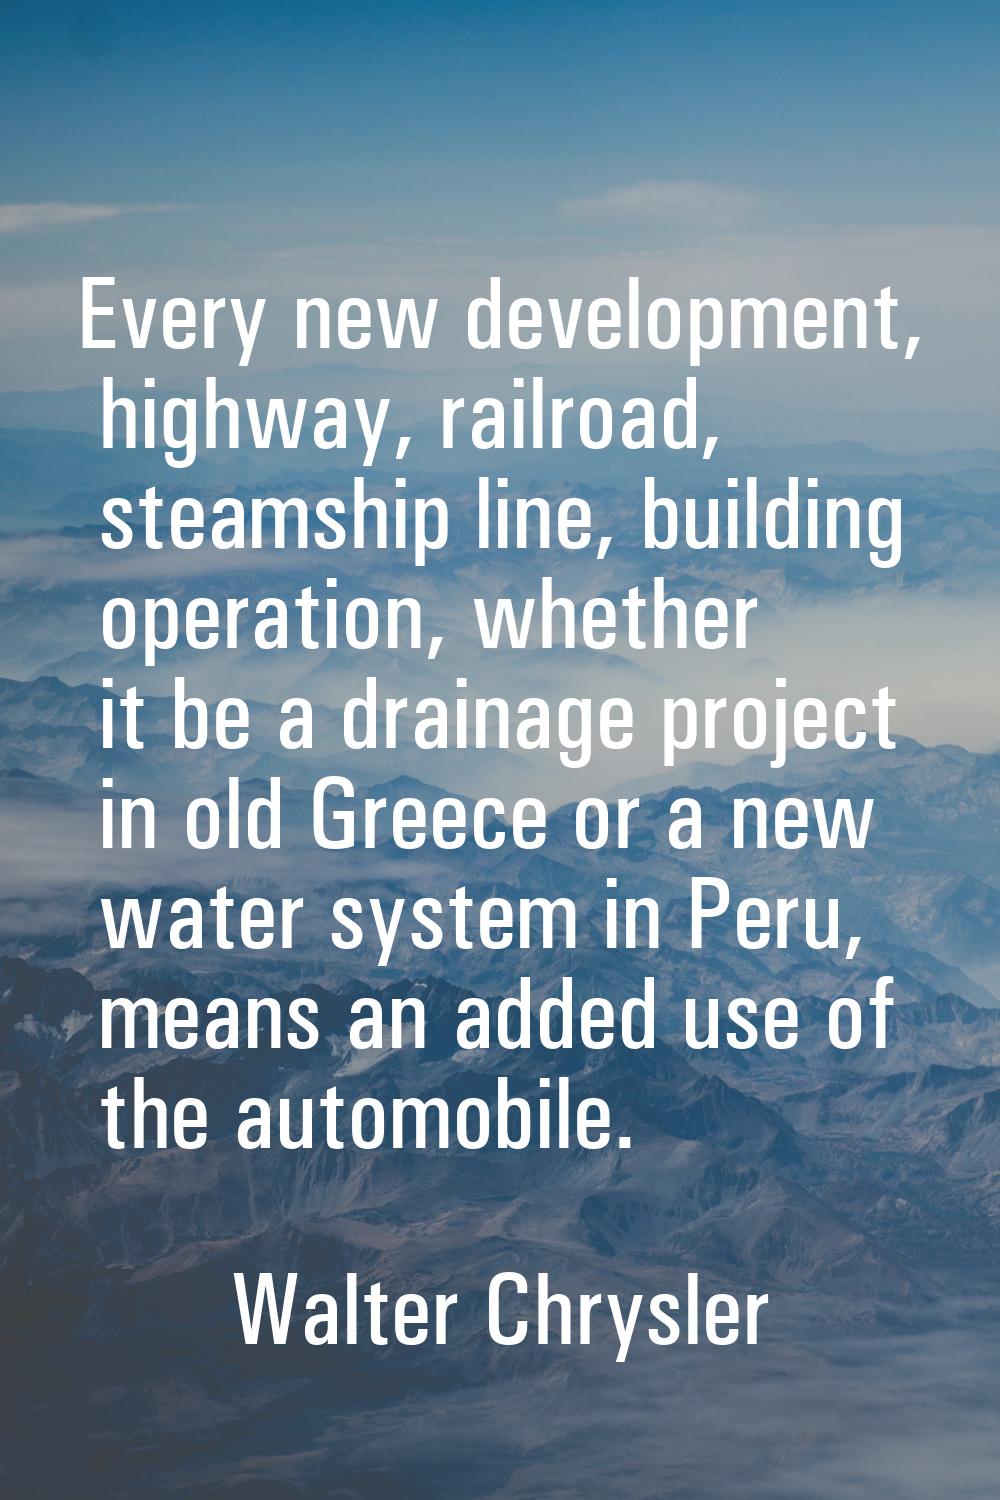 Every new development, highway, railroad, steamship line, building operation, whether it be a drain